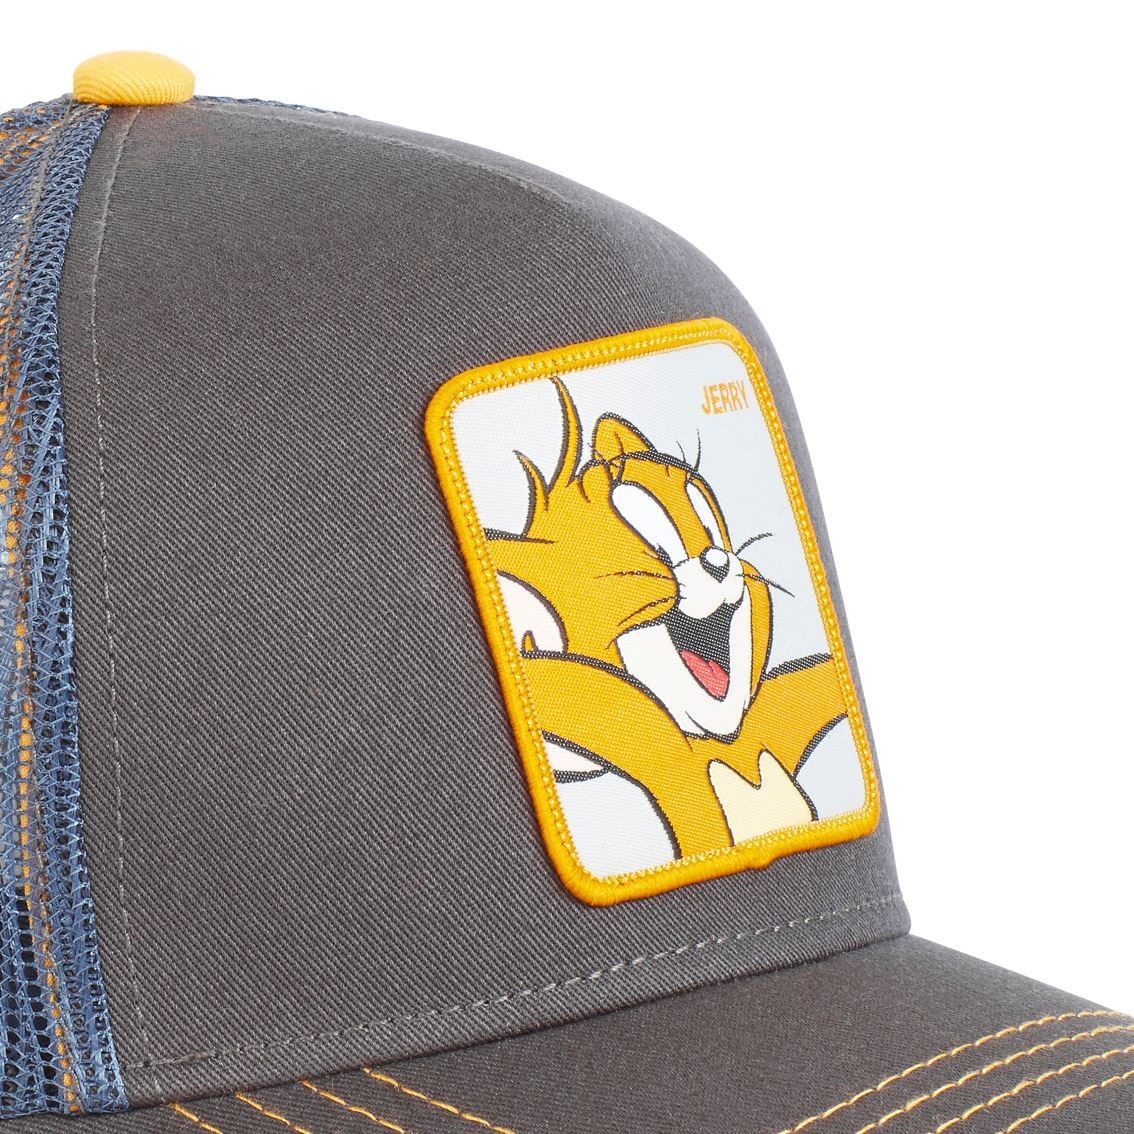 Jerry Grey Tom and Jerry Trucker Cap Capslab